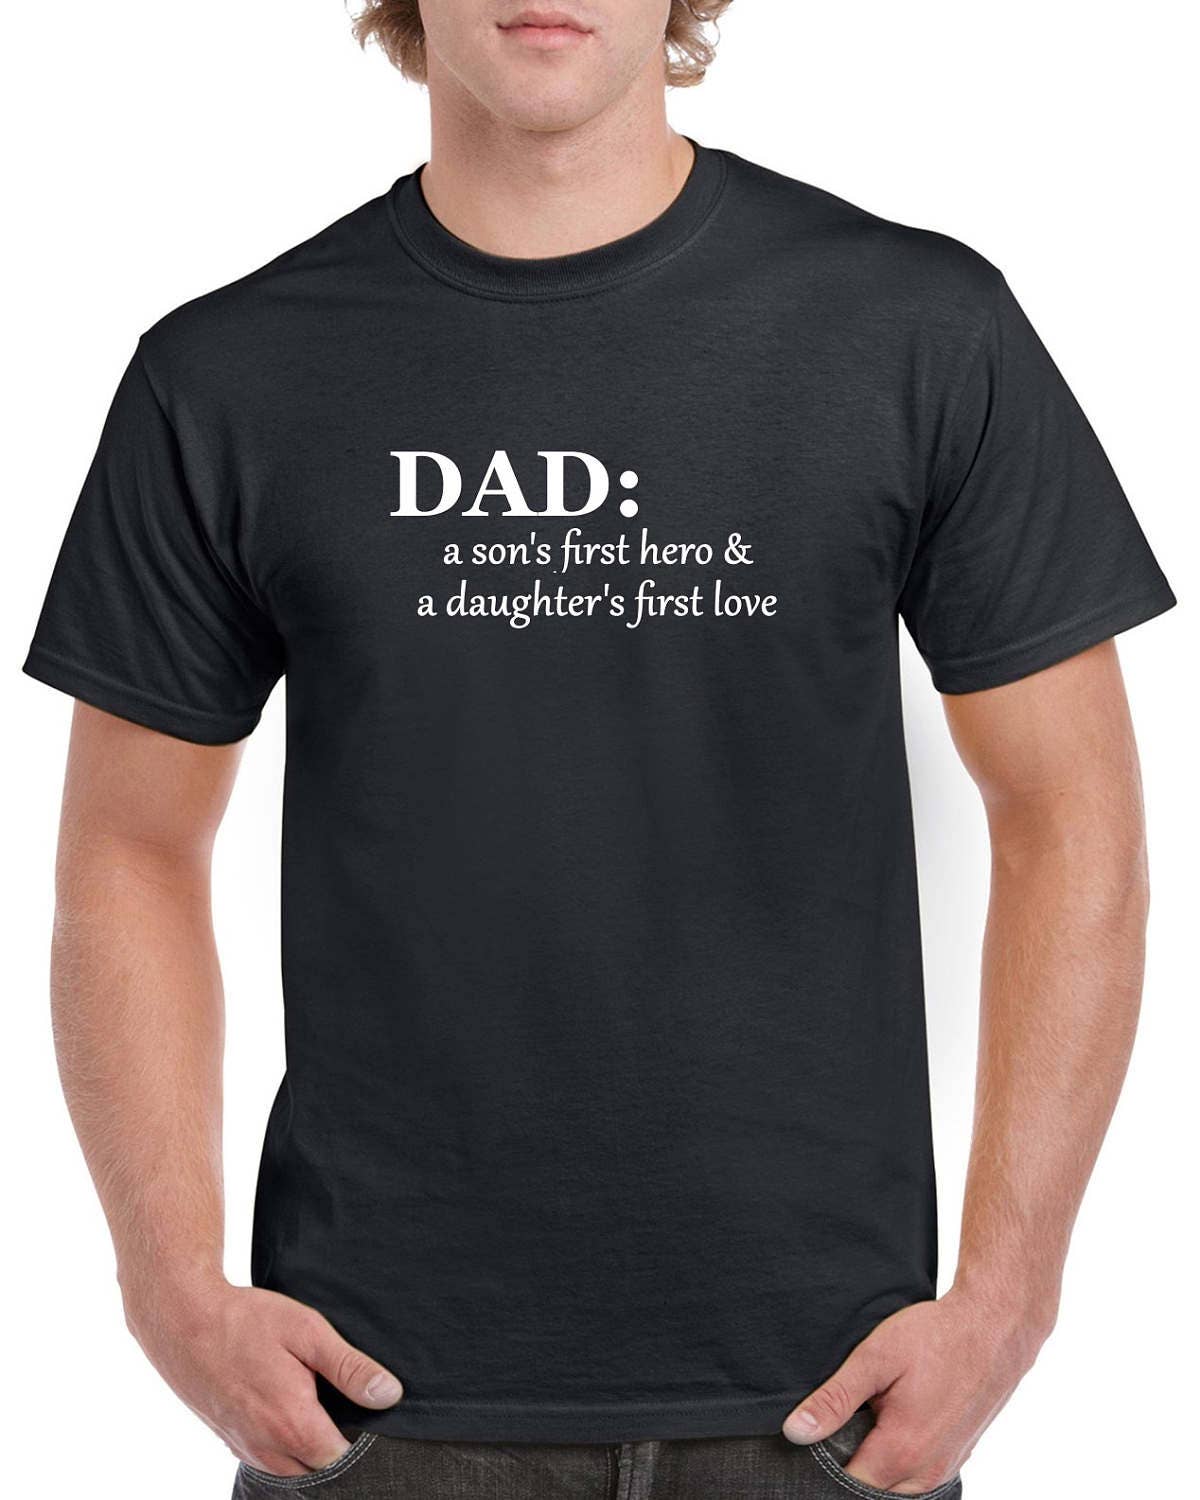 Dad: A Son's First Hero & Daughter's First Love Shirt - Etsy